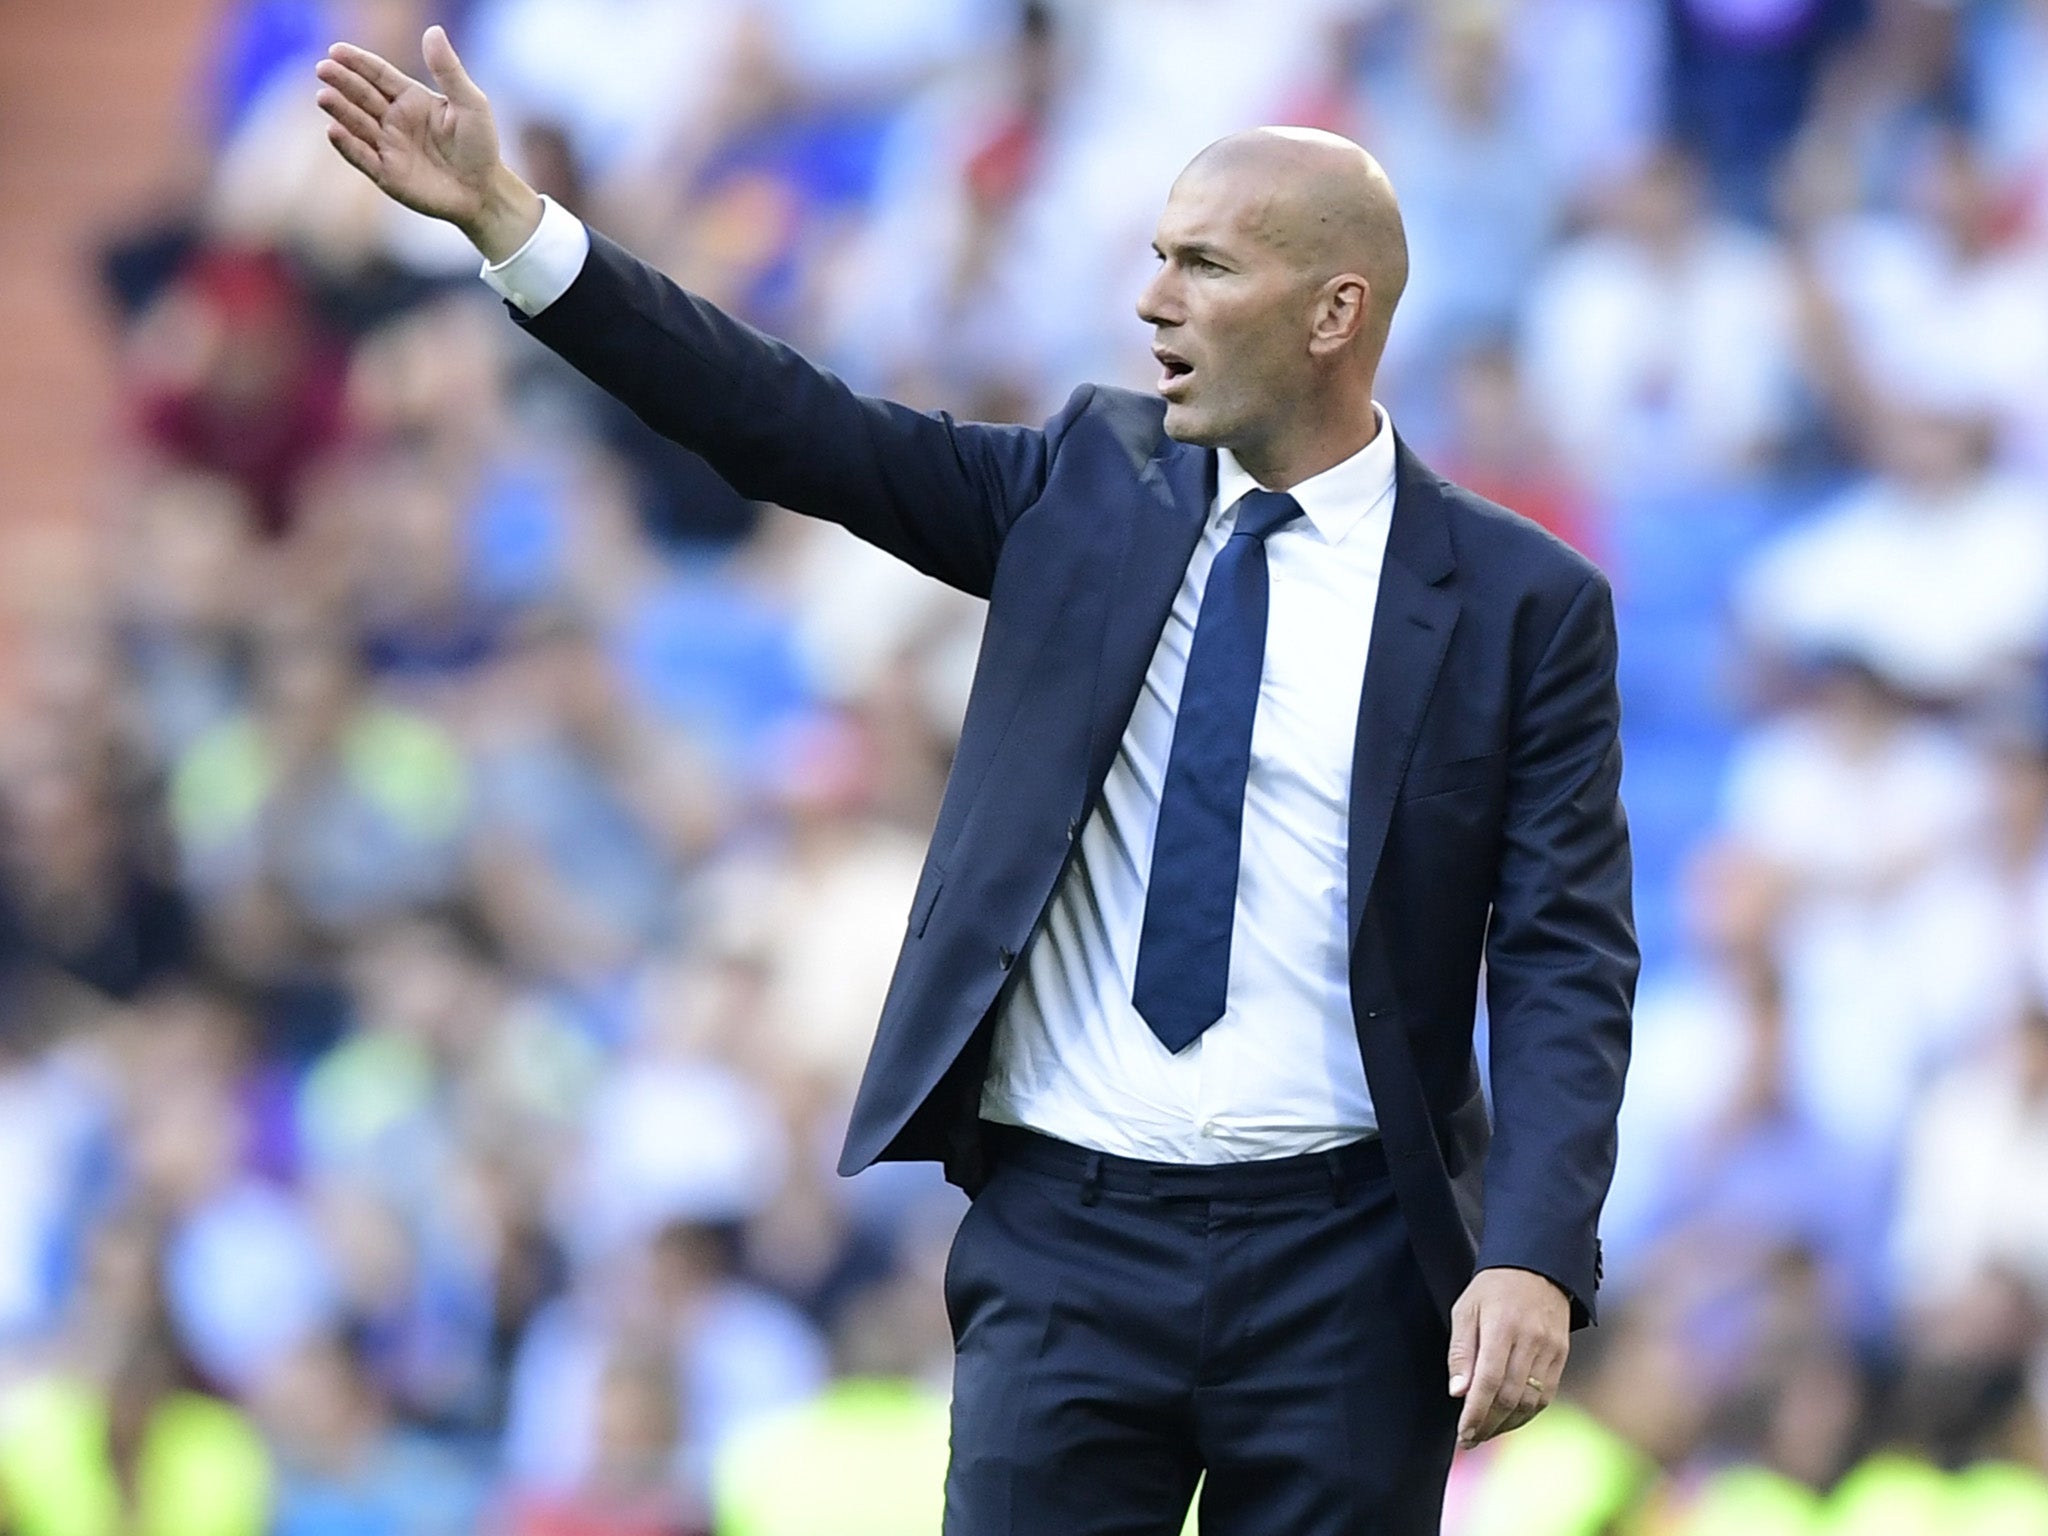 Zidane has only lost twice as Real Madrid manager